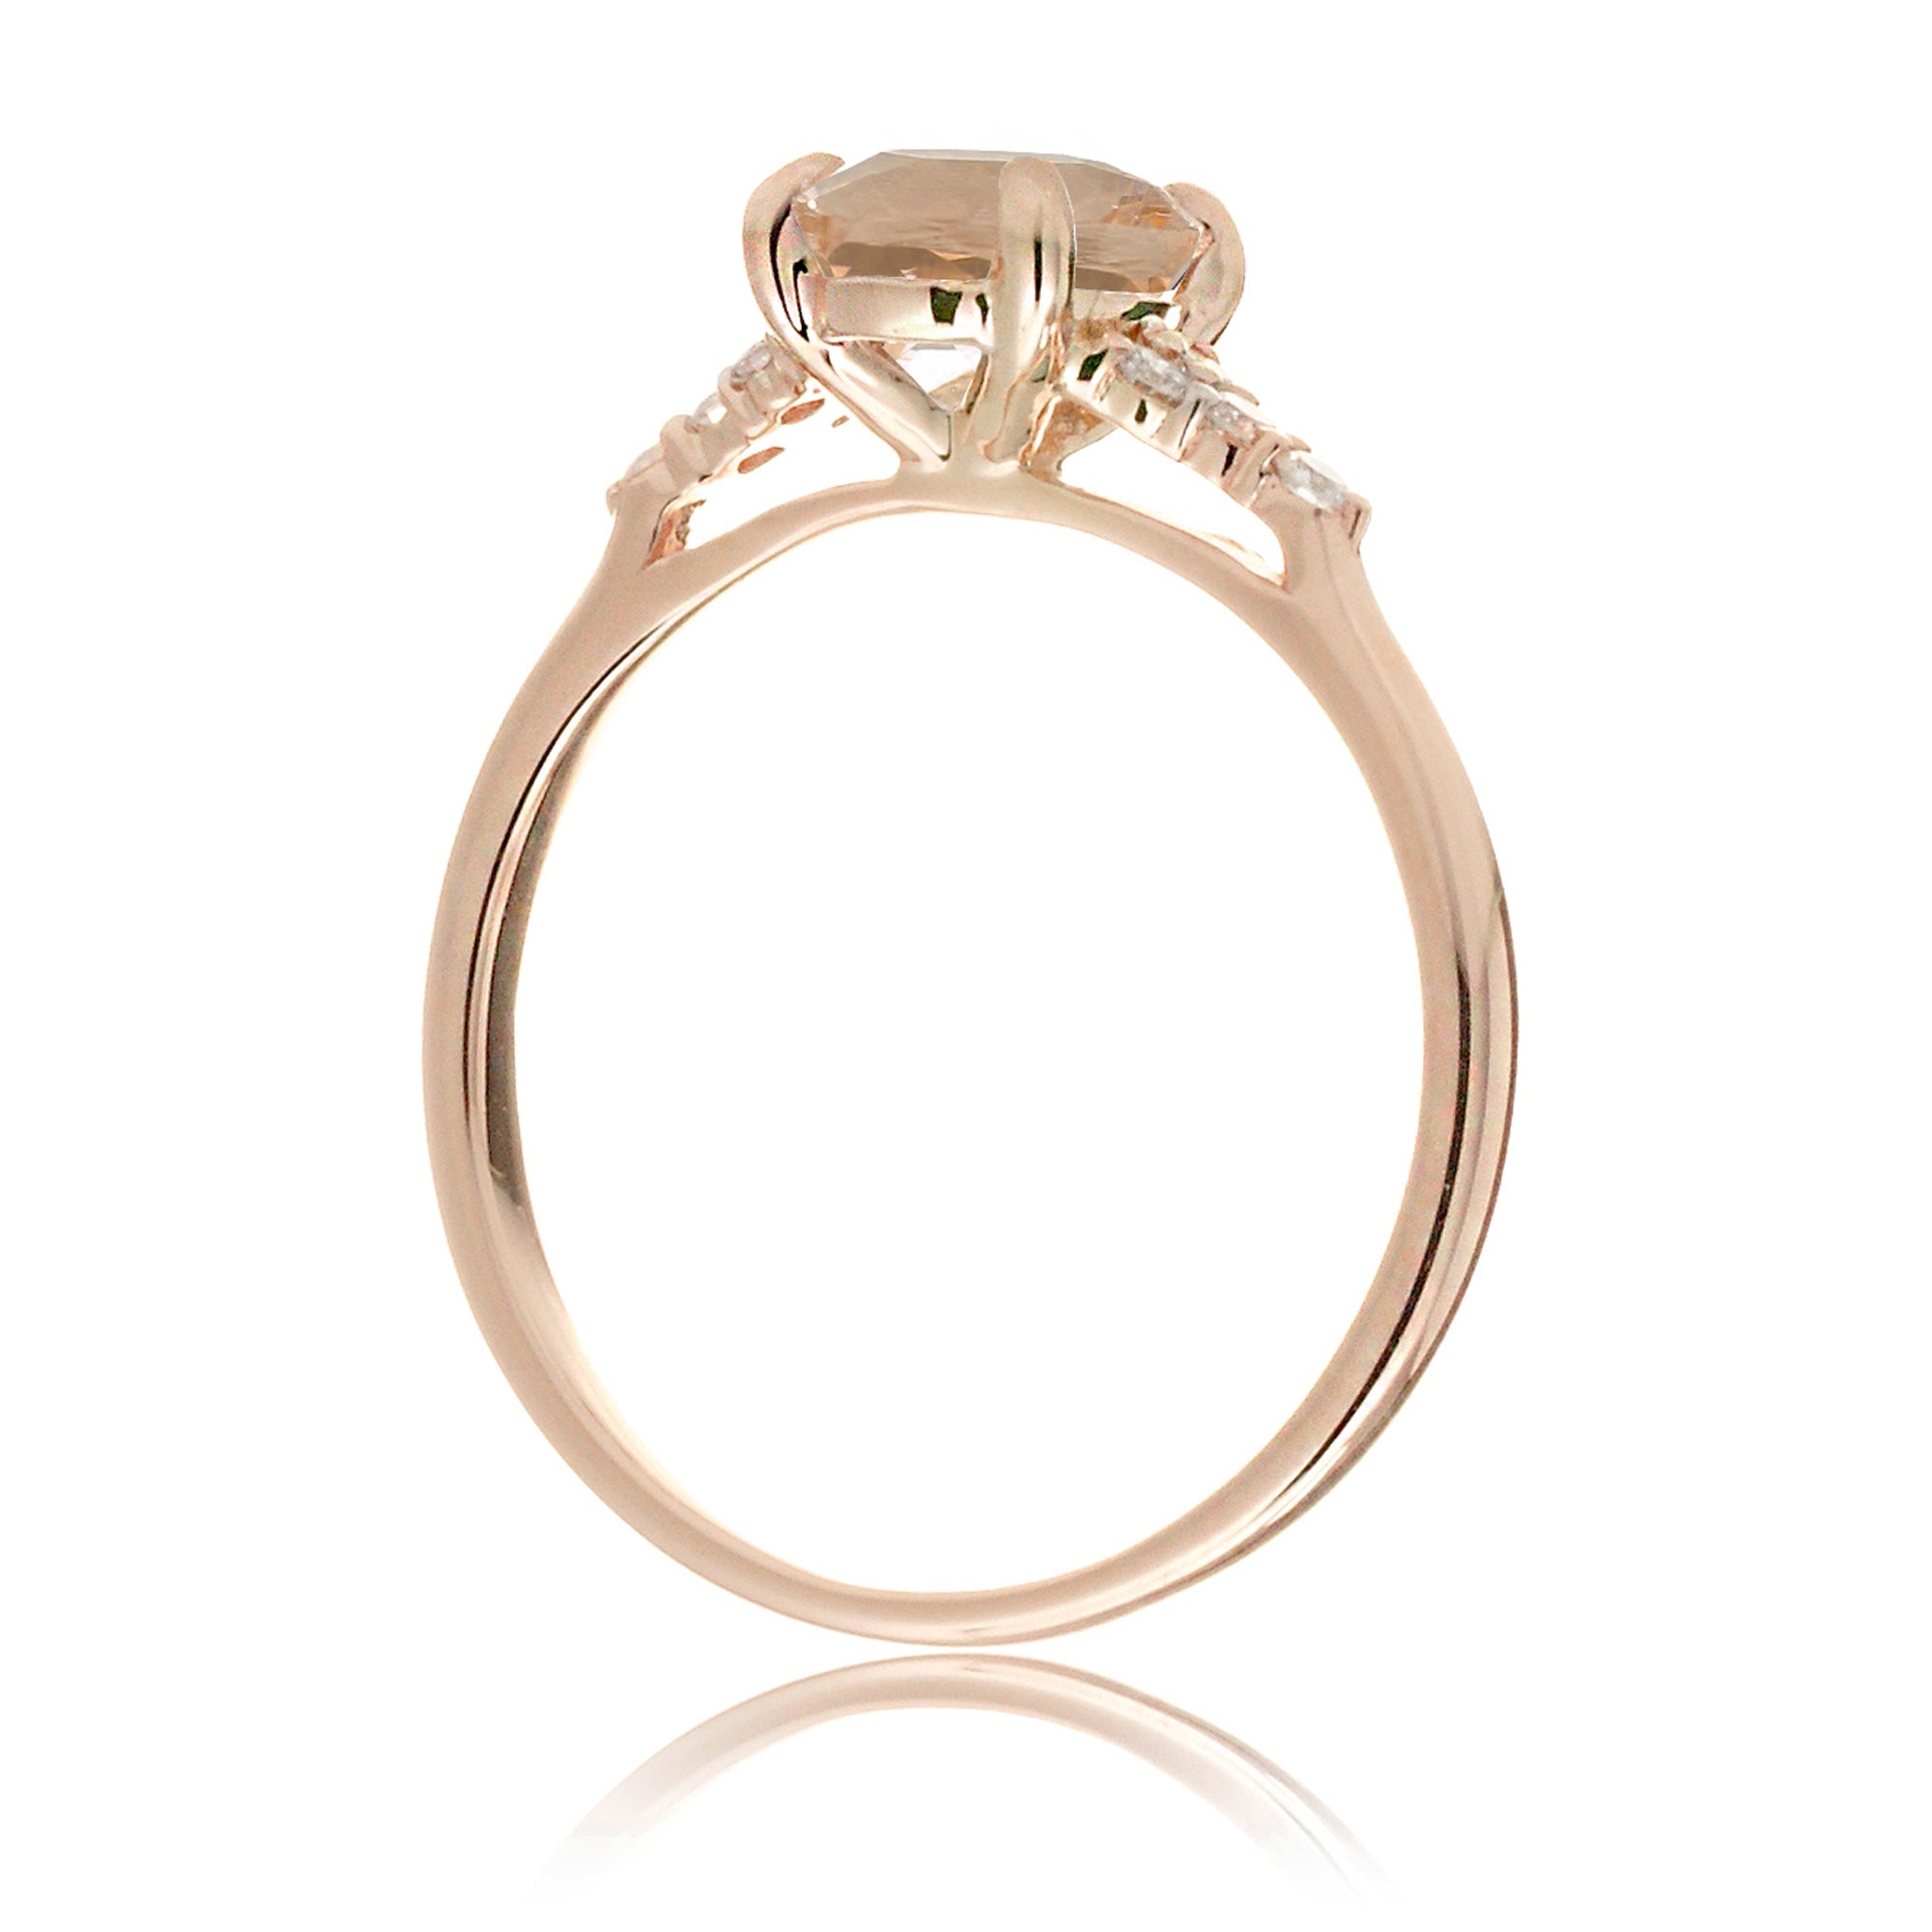 Round morganite ring with diamond accent in rose gold